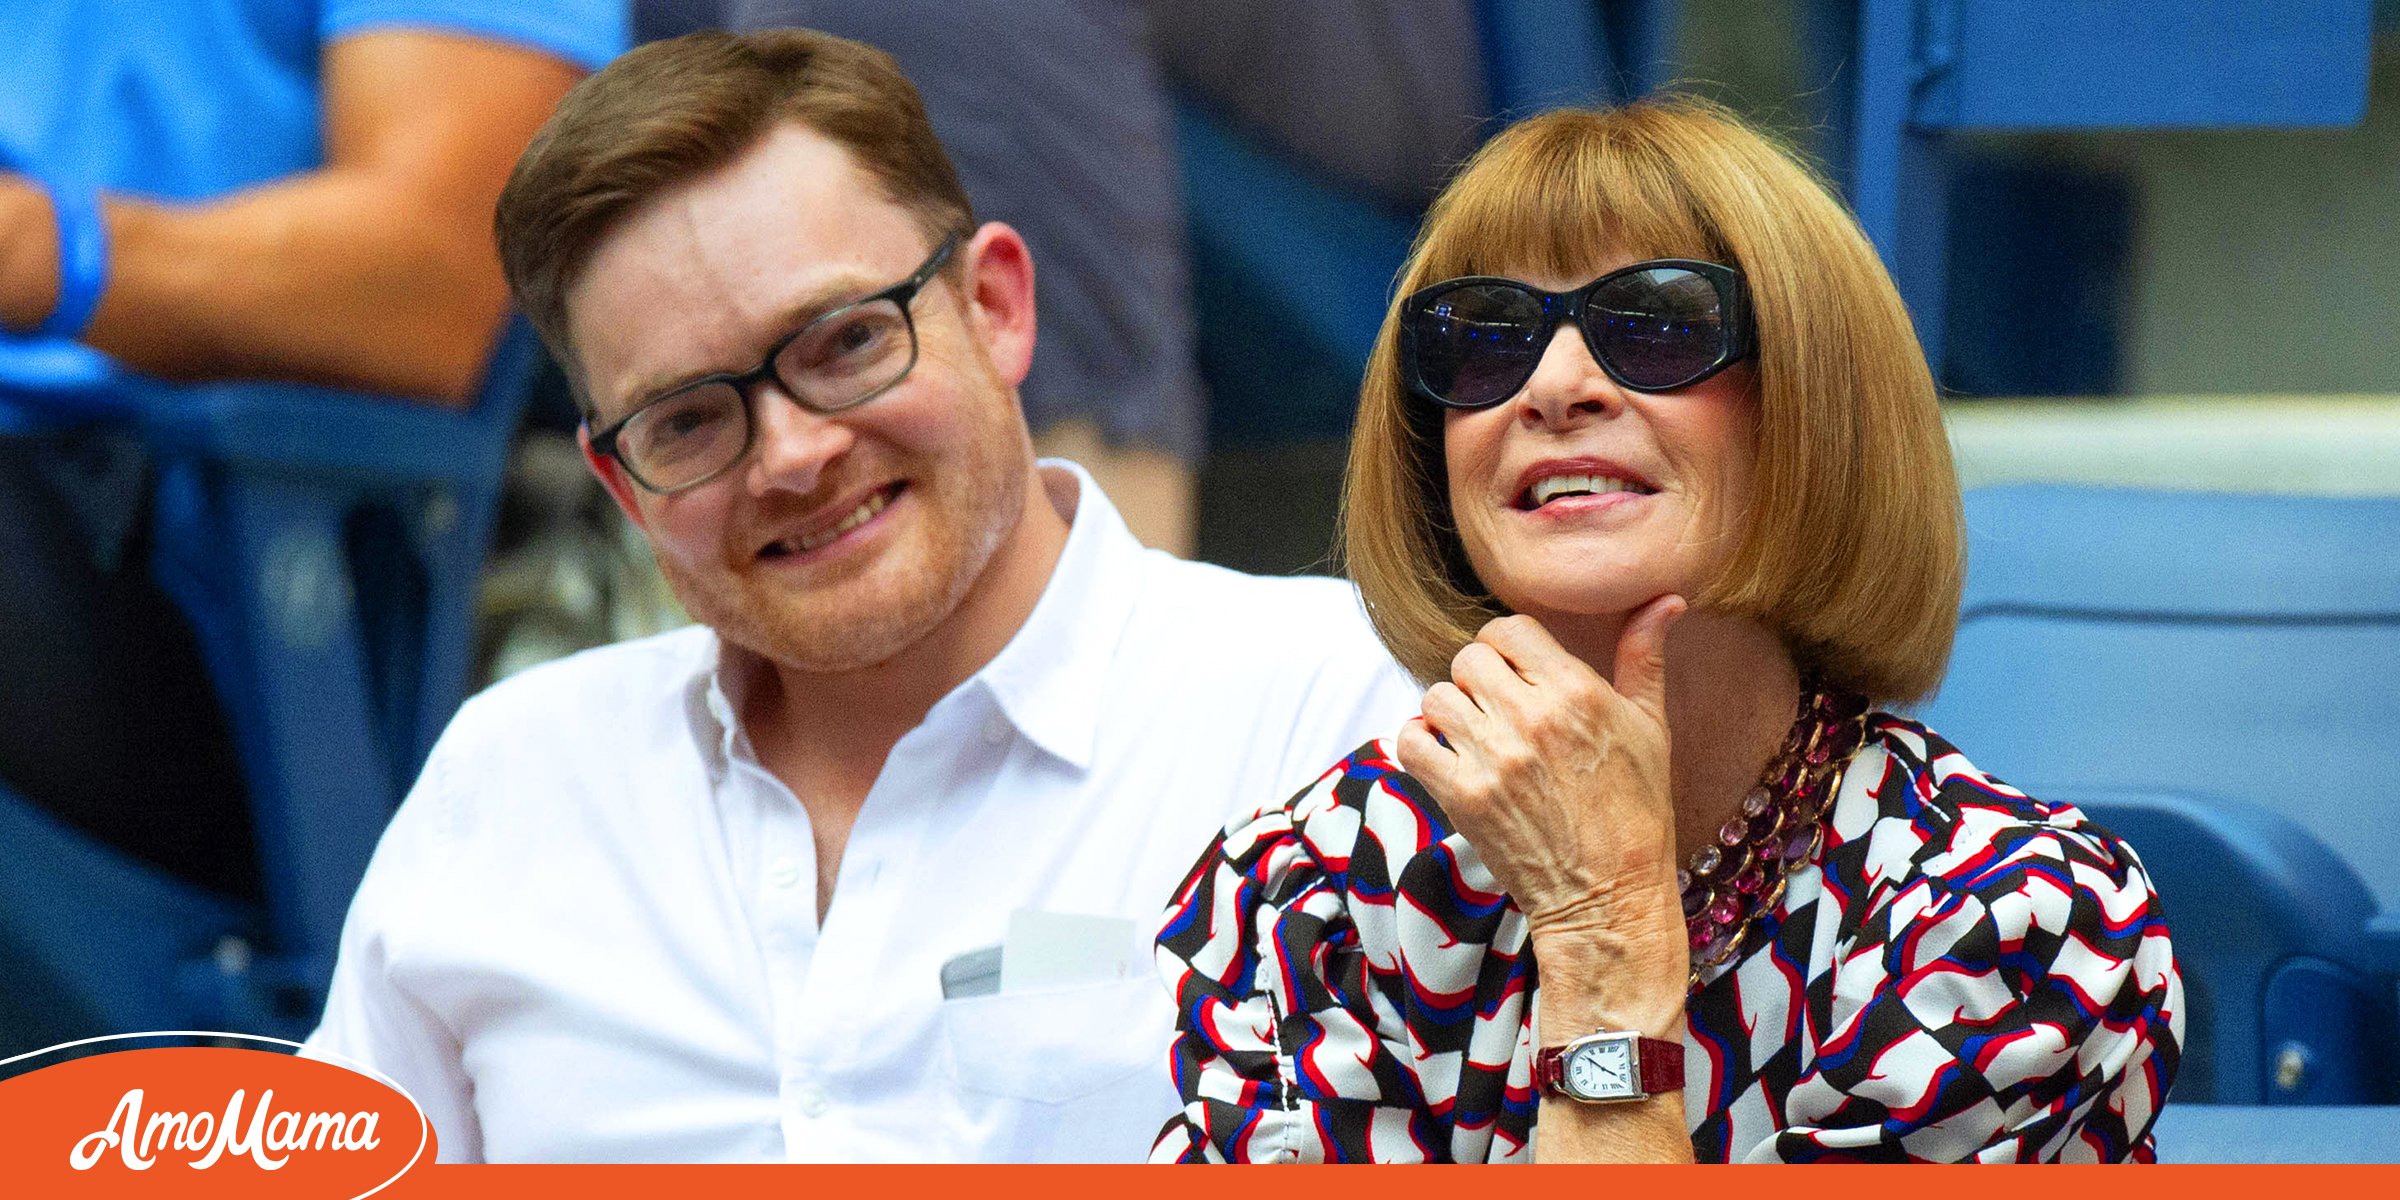 Charles Shaffer Is Anna Wintour's Only Son Who She's Very Proud Of